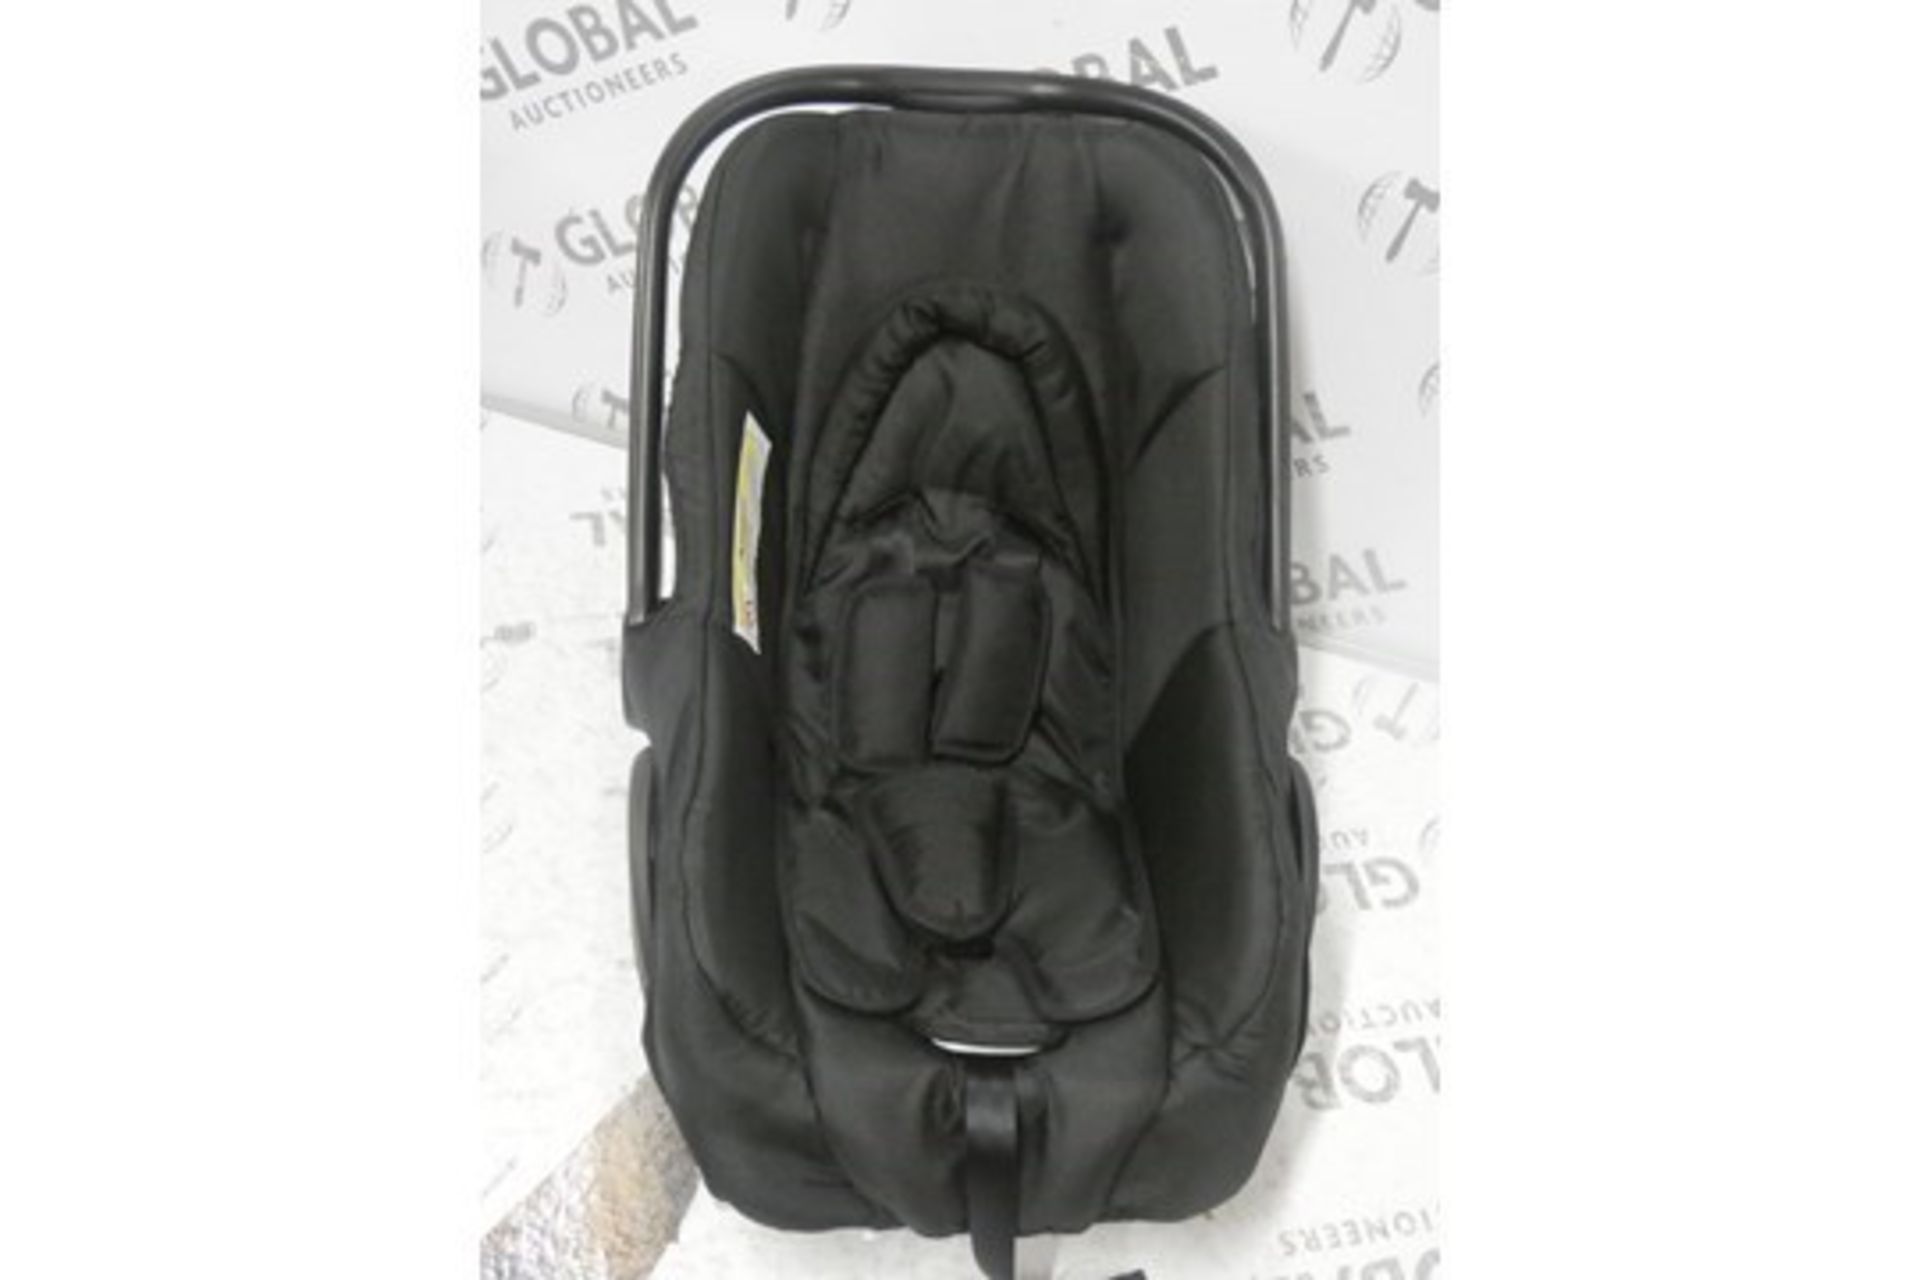 Brand New New Born Incar Kids Safety Seats RRP£95each (Viewing or Appraisals Highly Recommended)